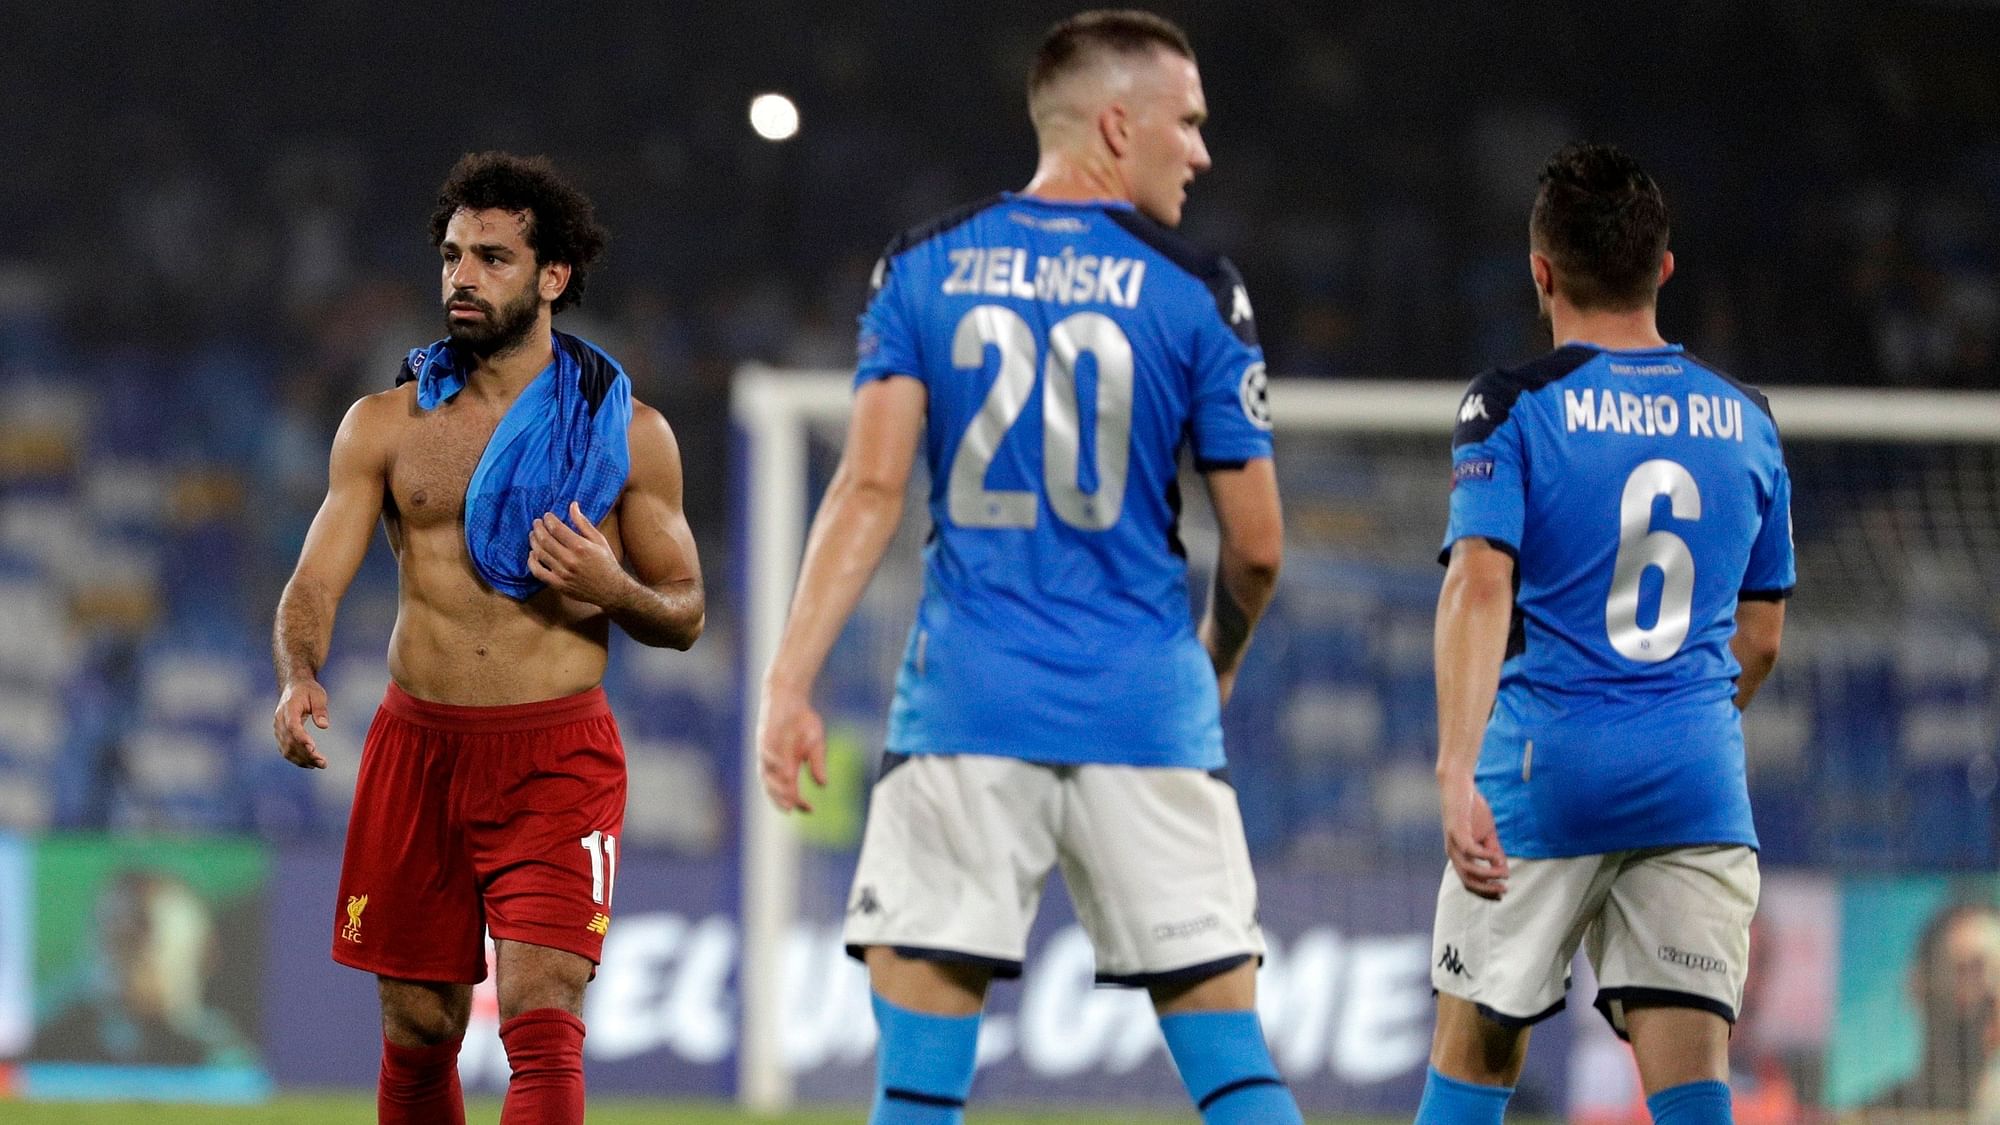 Dries Mertens converted the penalty eight minutes from the end of an entertaining match after a contentious foul by Andy Robertson on Jose Callejon.